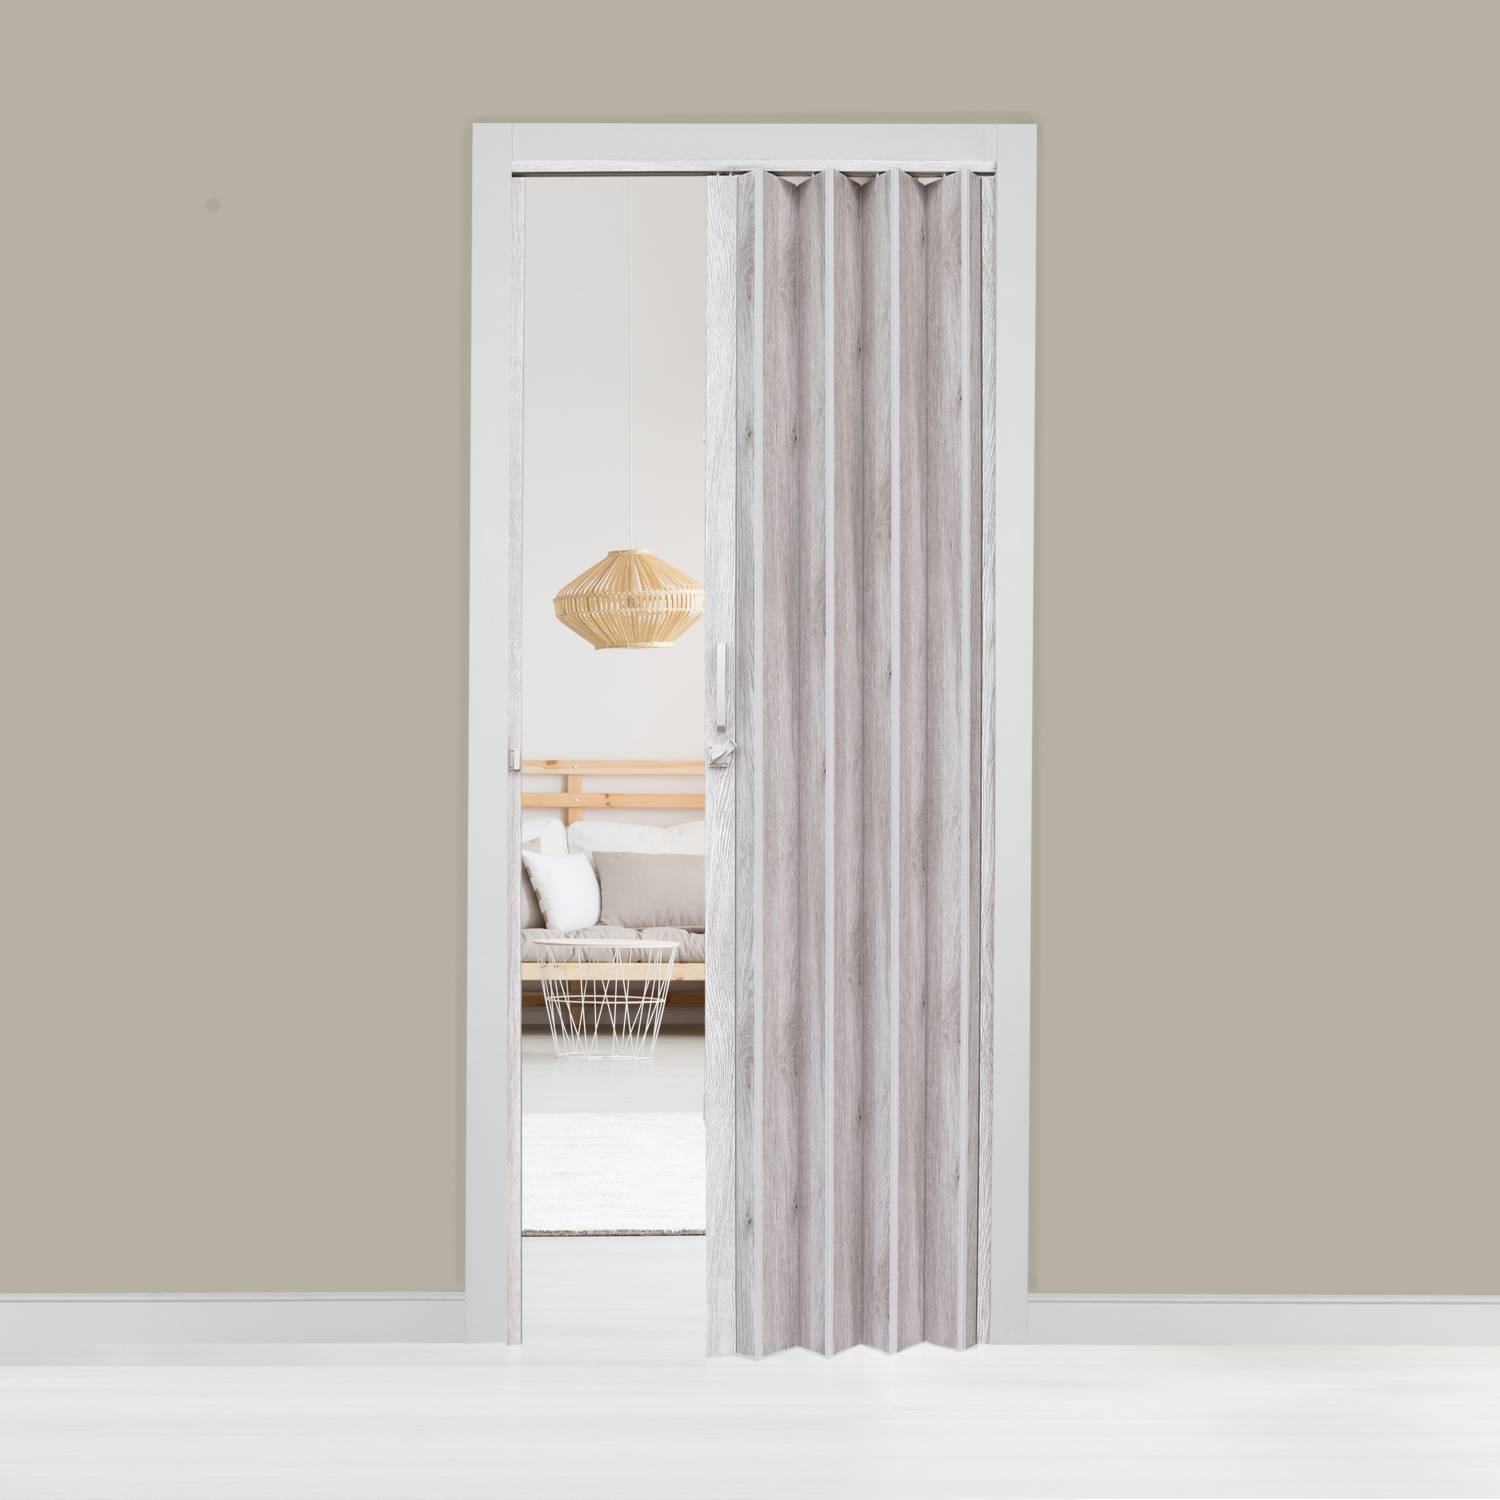 Puerta Plegable Madera MDP 891-920x240 cm Ap. Central -Rovere MADERKIT